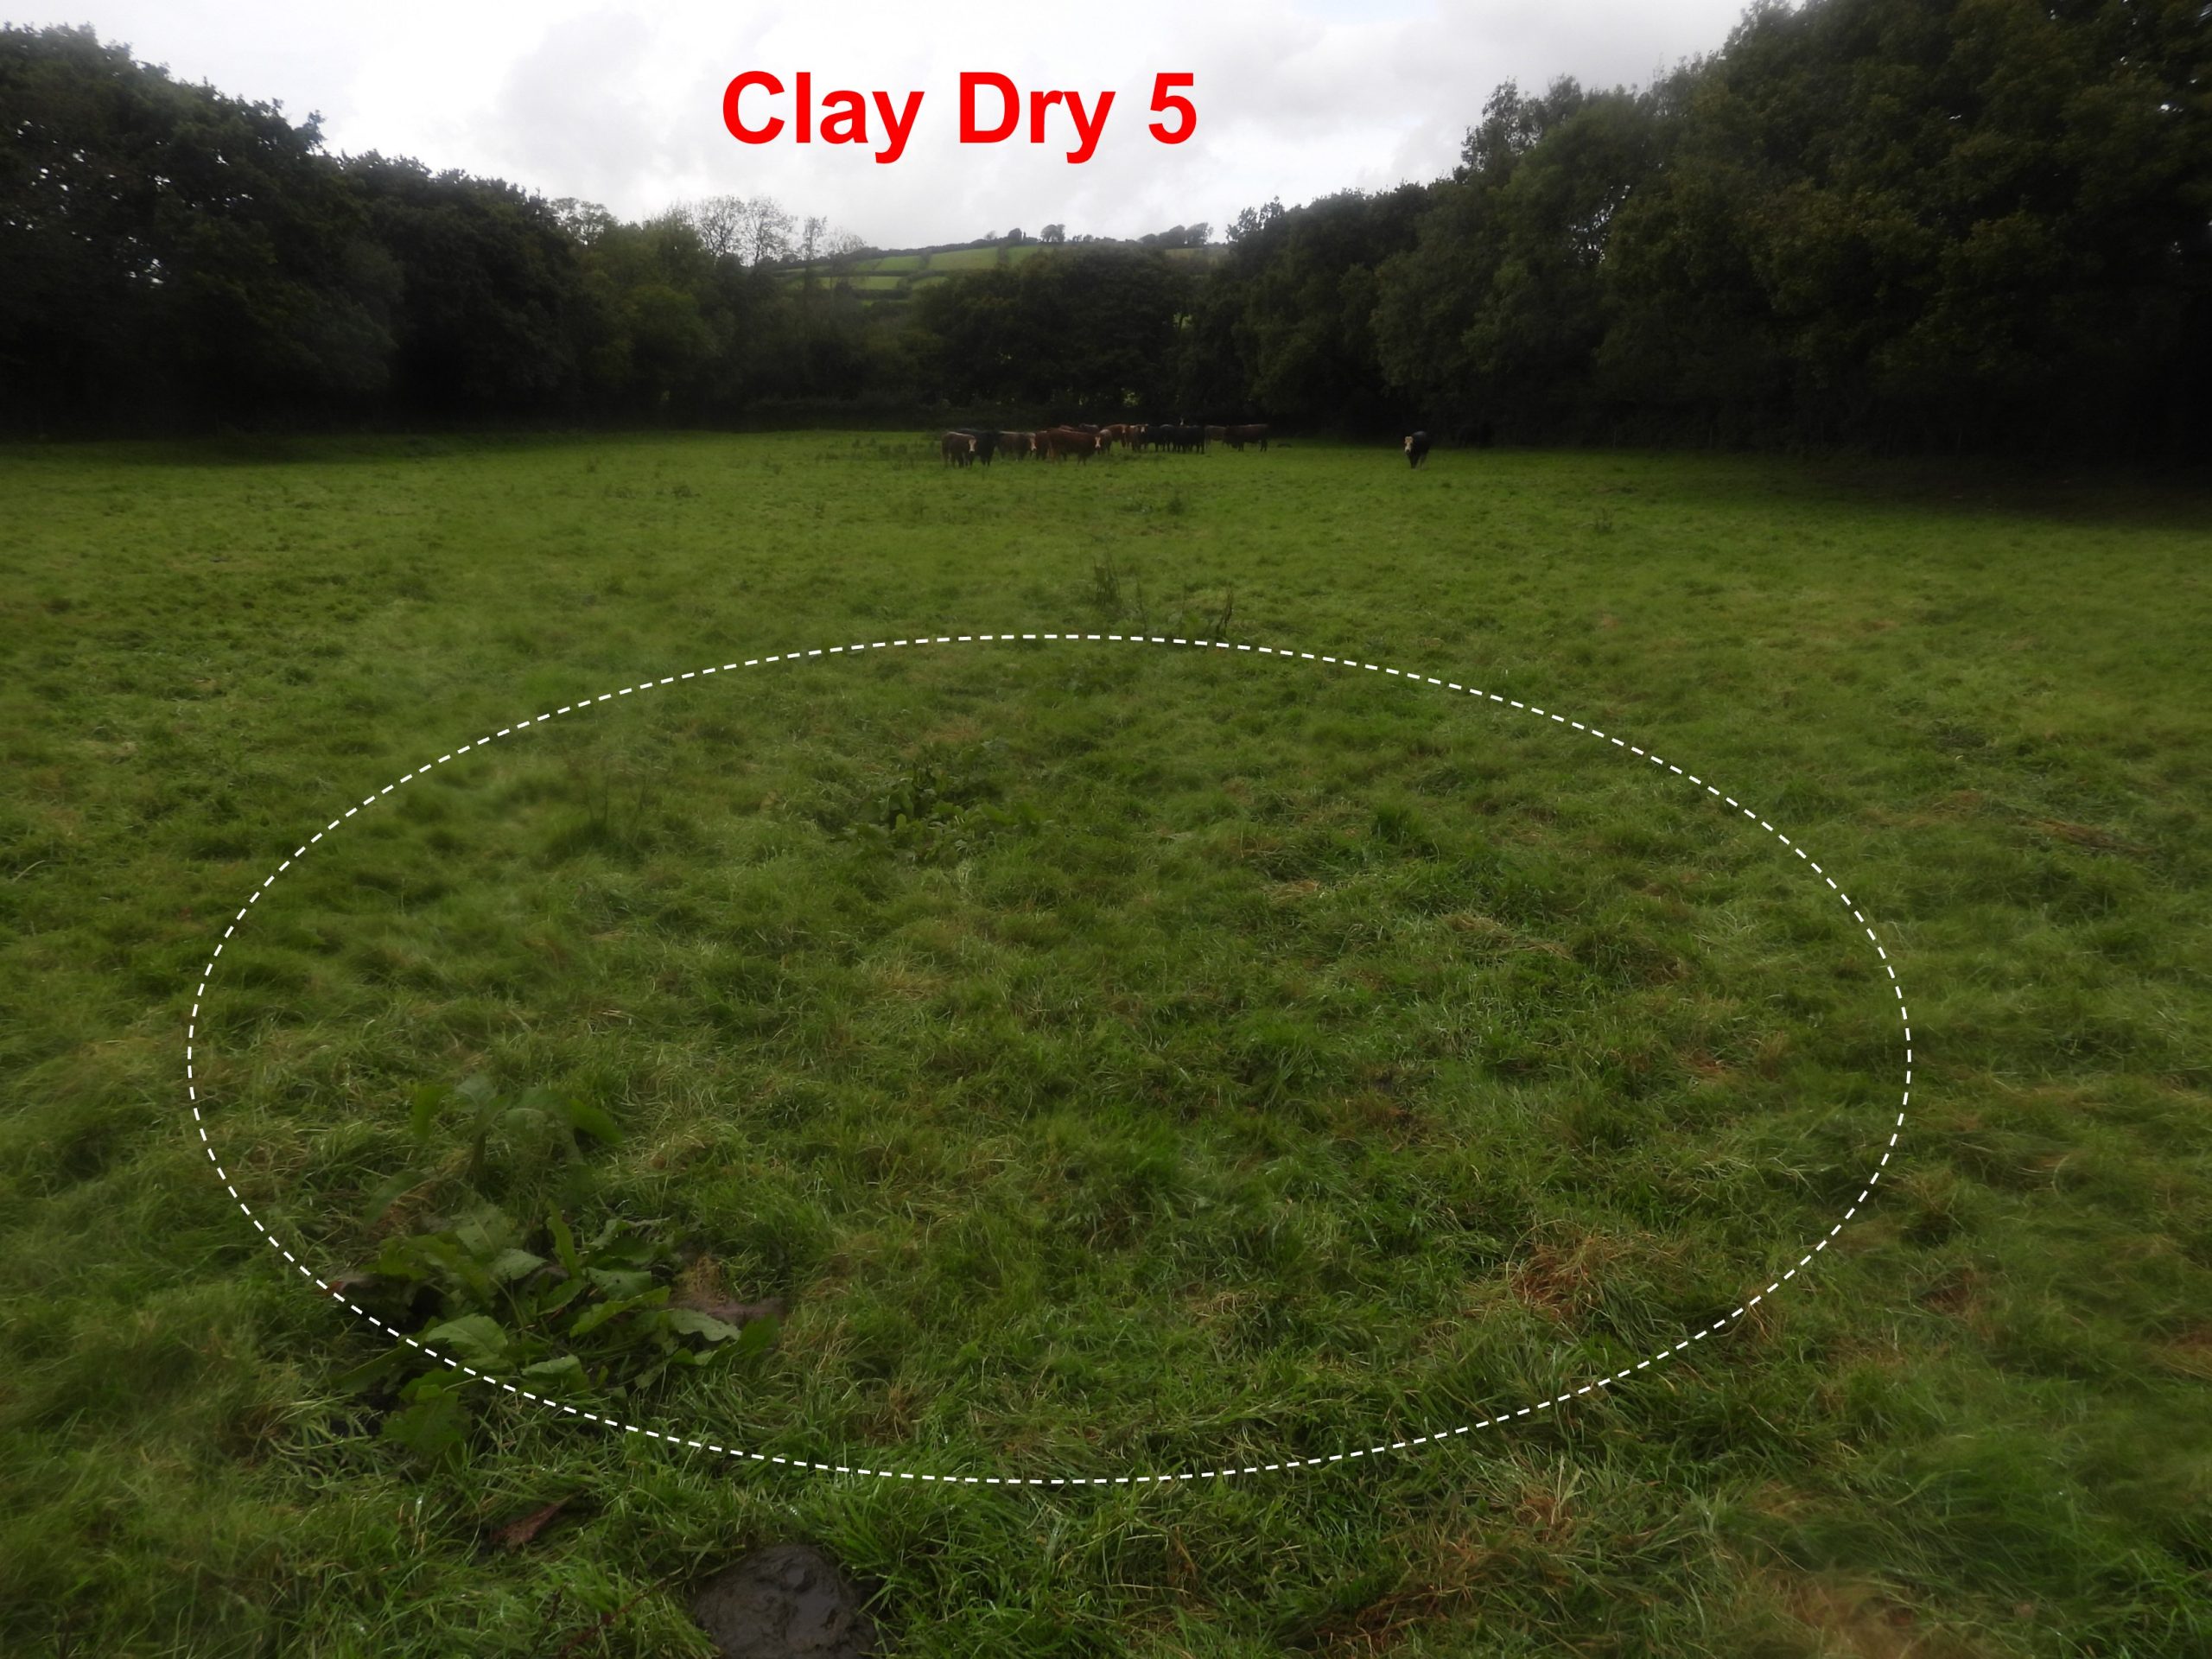 6. Clay Dry 5